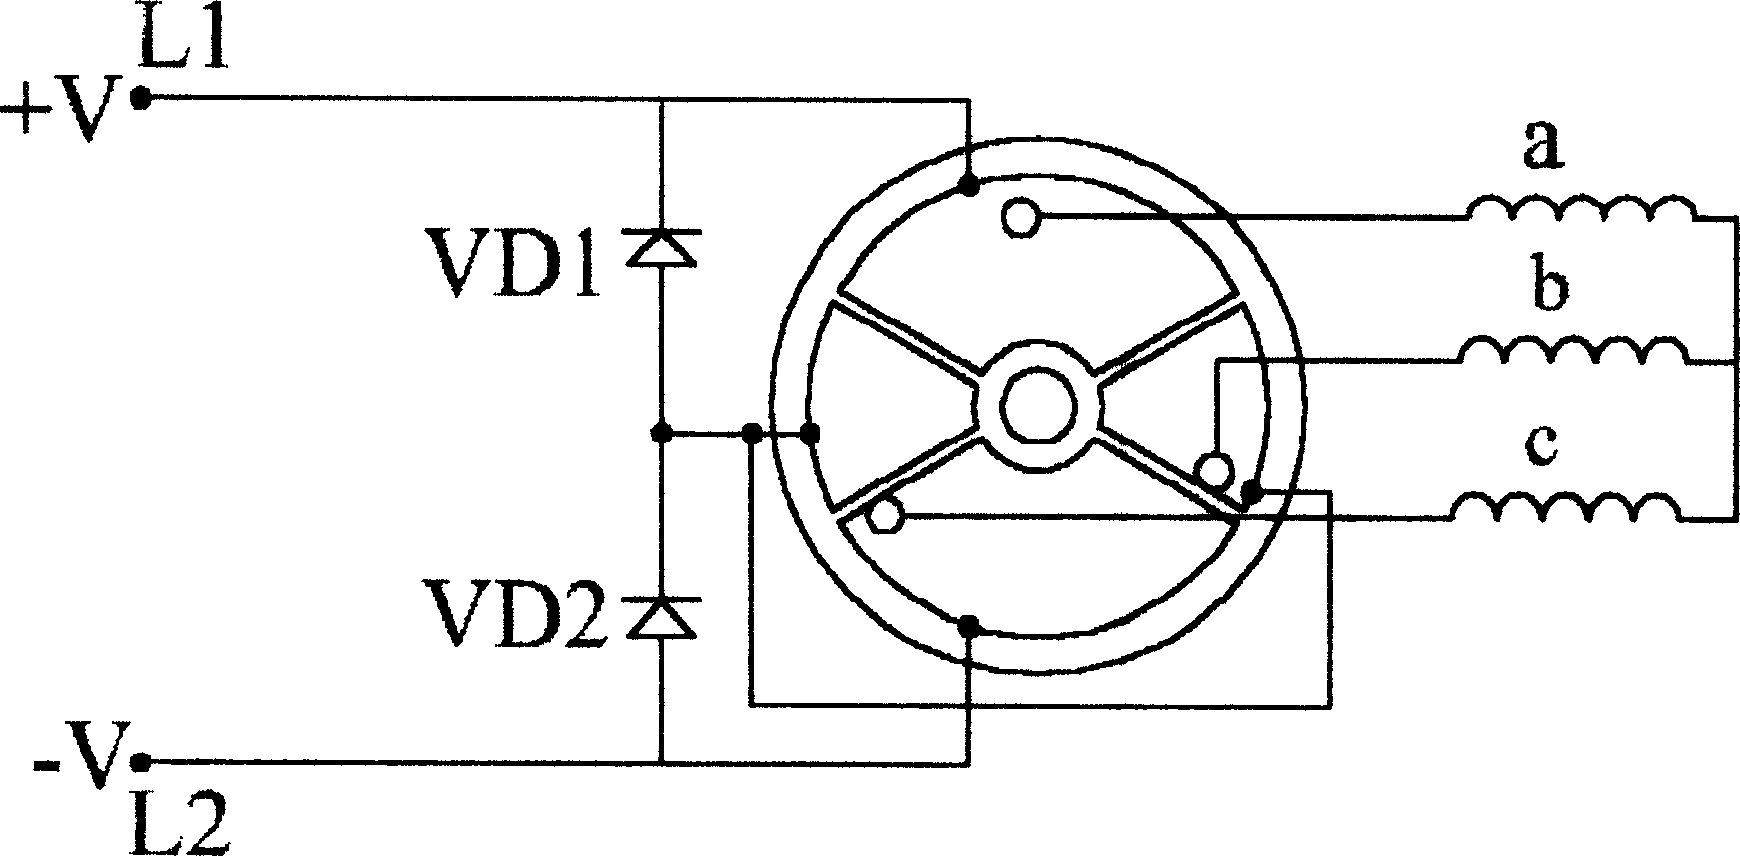 DC motor with commutator and its driven washing machine